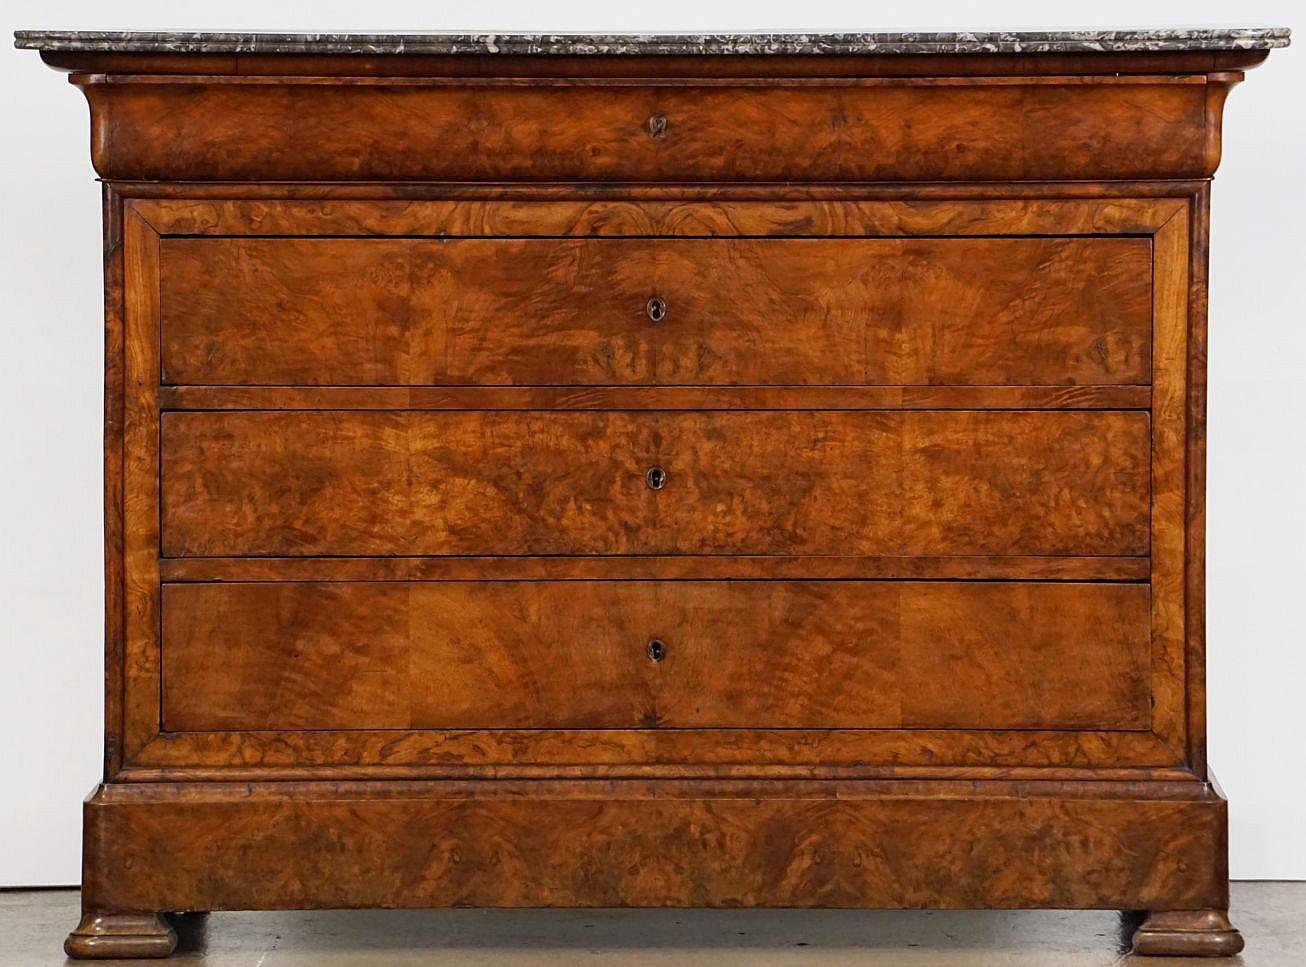 A handsome Louis Philippe console chest or commode from France, of beautifully patinated burled walnut with a figured marble top, featuring four fitted long drawers, brass escutcheons, and set upon shaped feet.